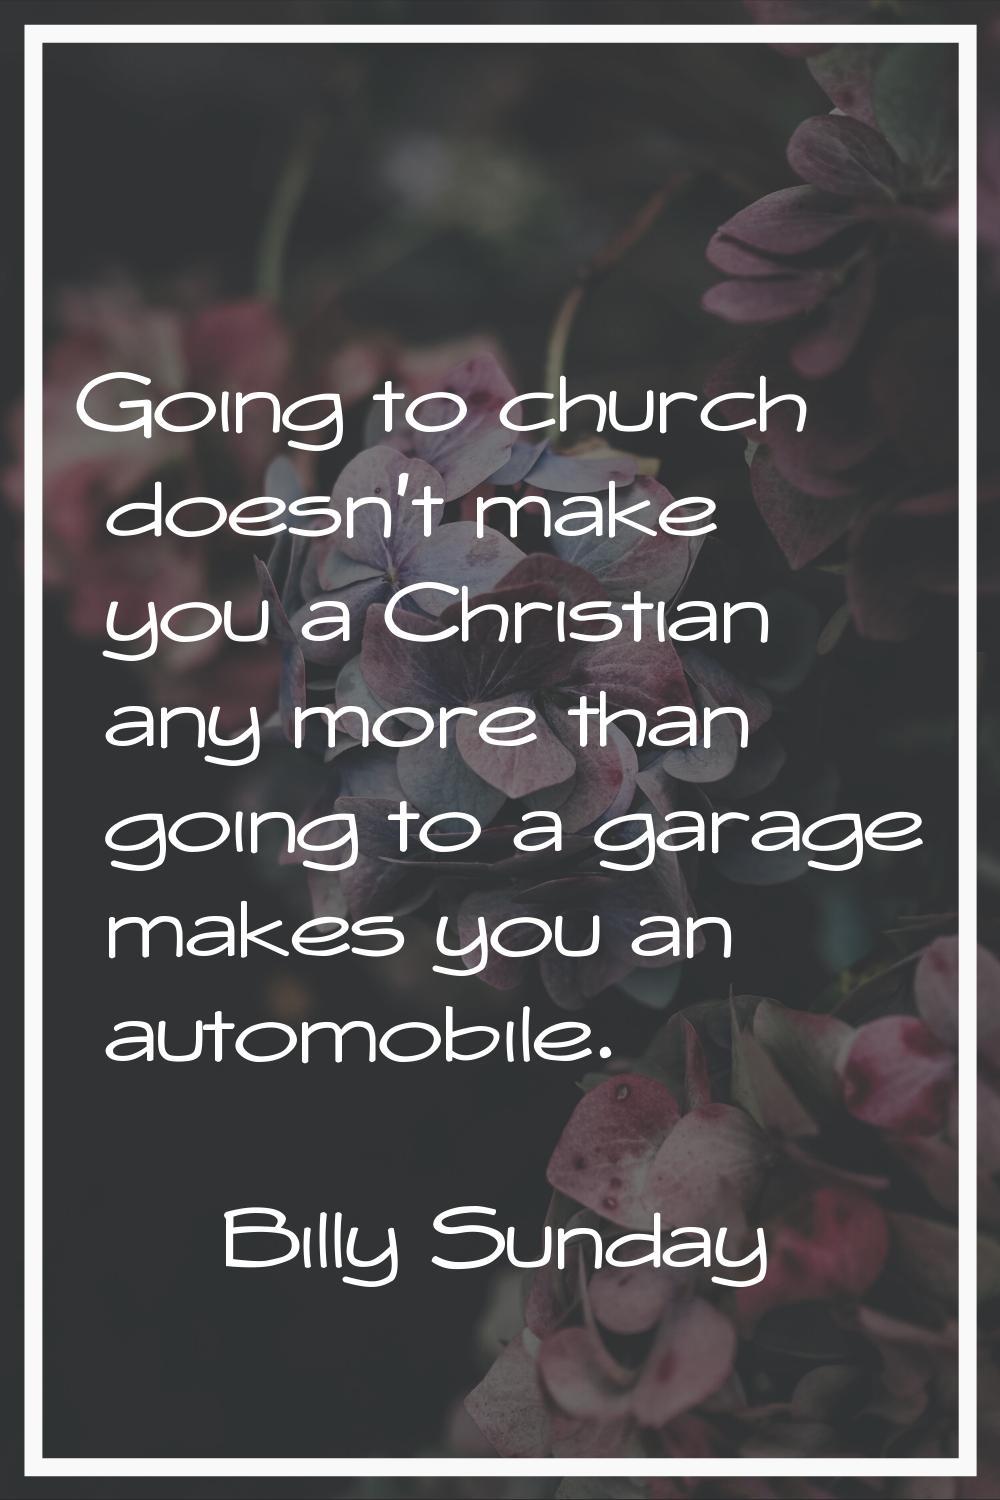 Going to church doesn't make you a Christian any more than going to a garage makes you an automobil